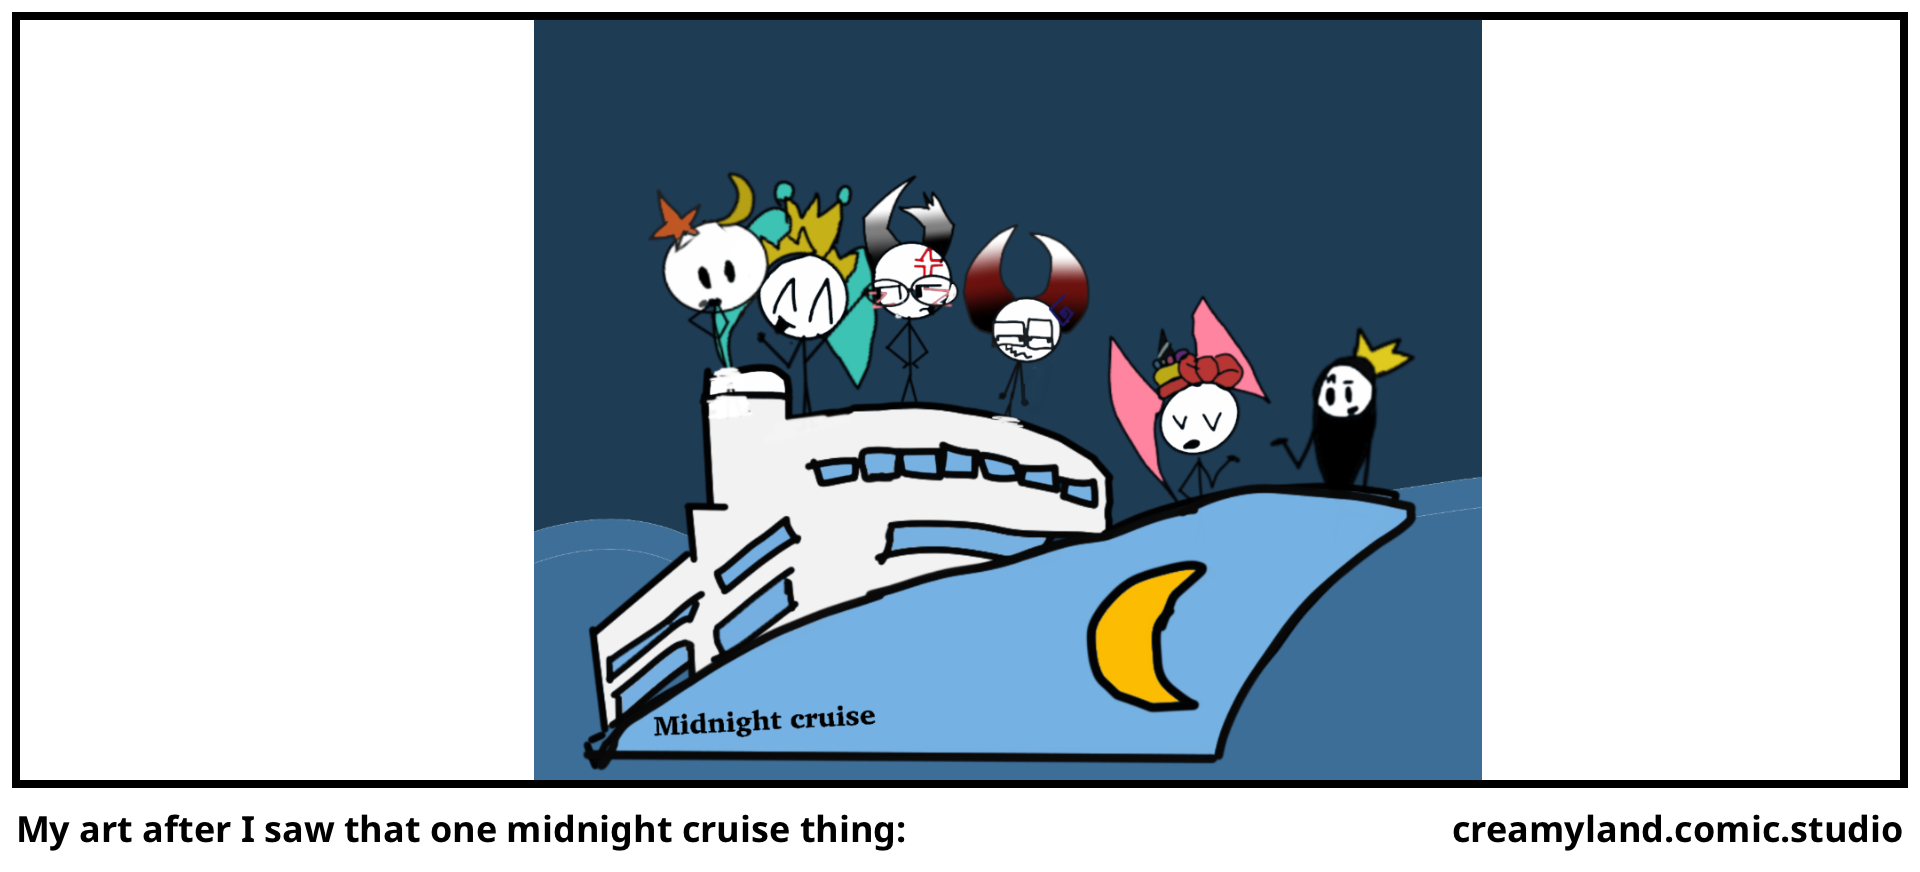 My art after I saw that one midnight cruise thing: